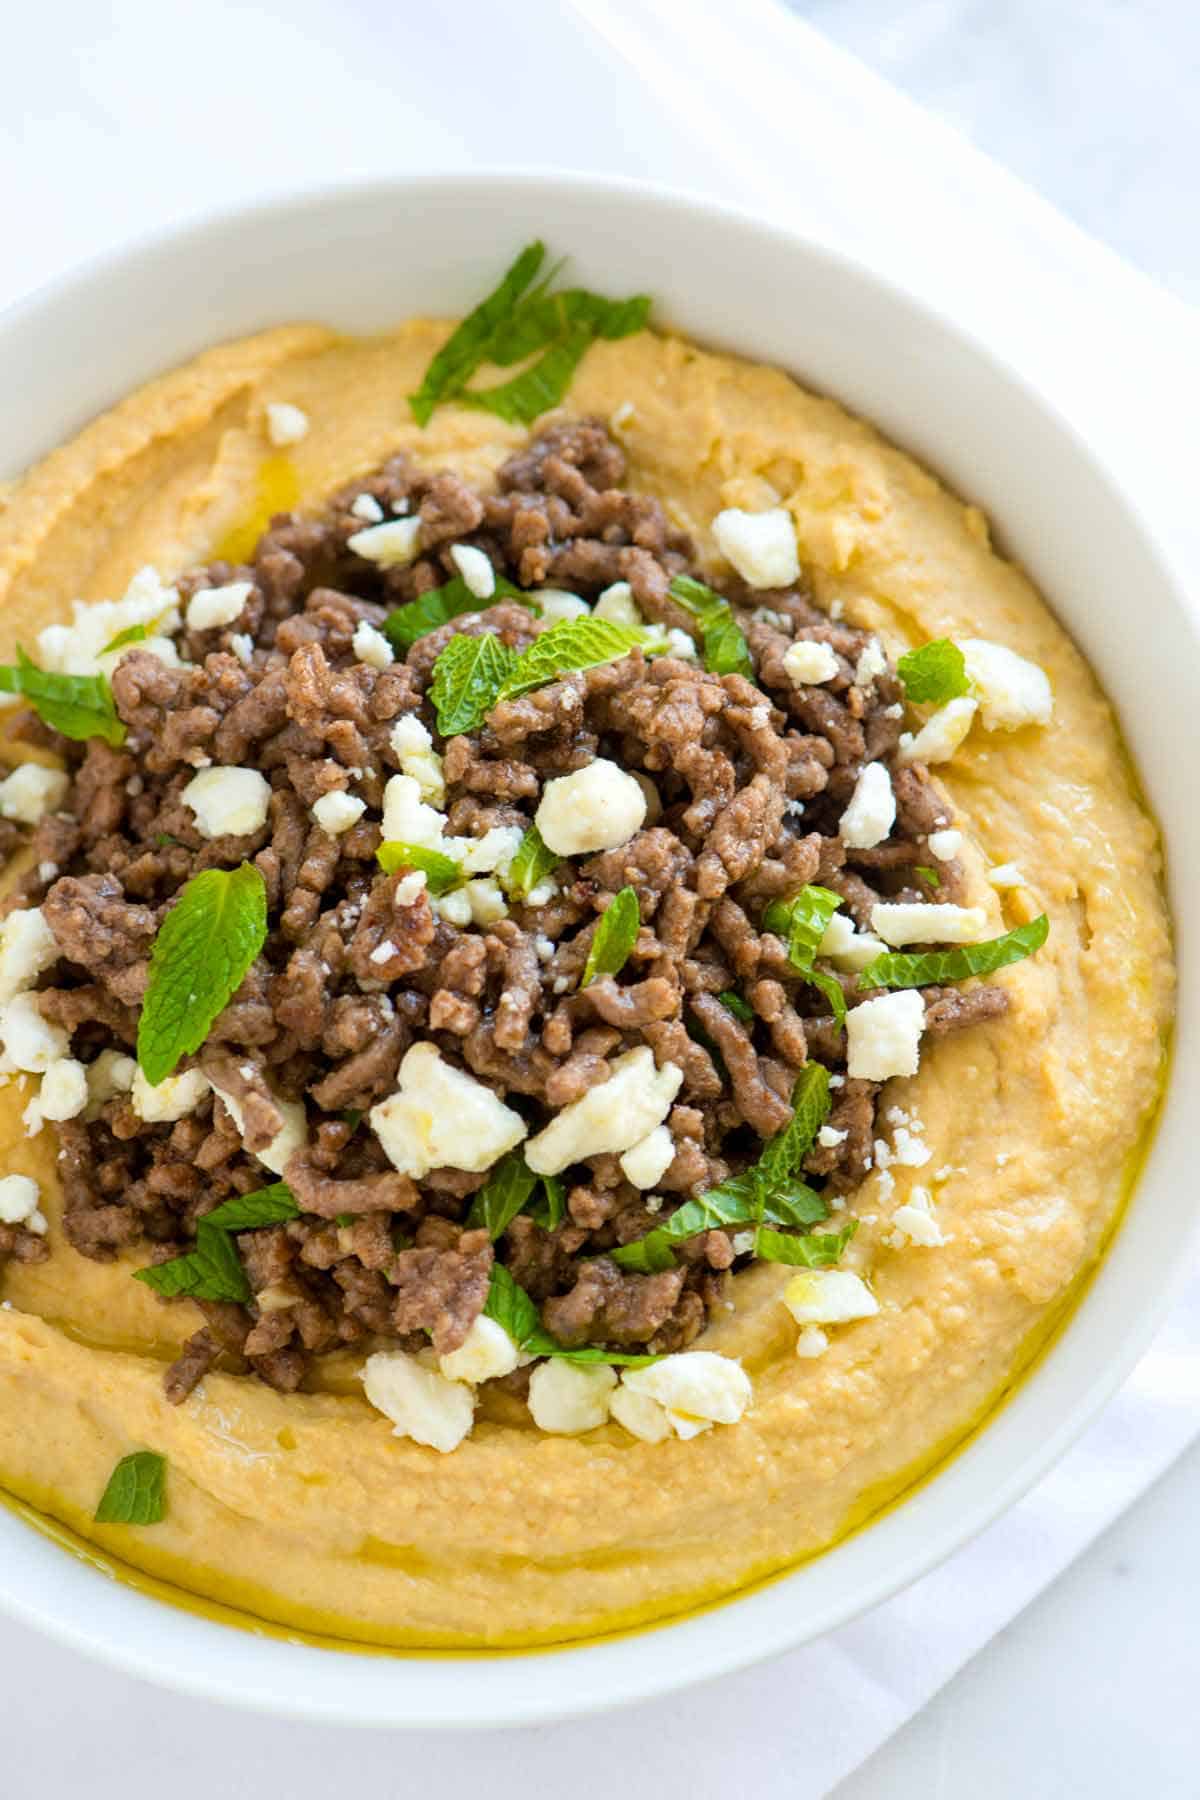 Hummus with Spiced Beef, Feta and Mint